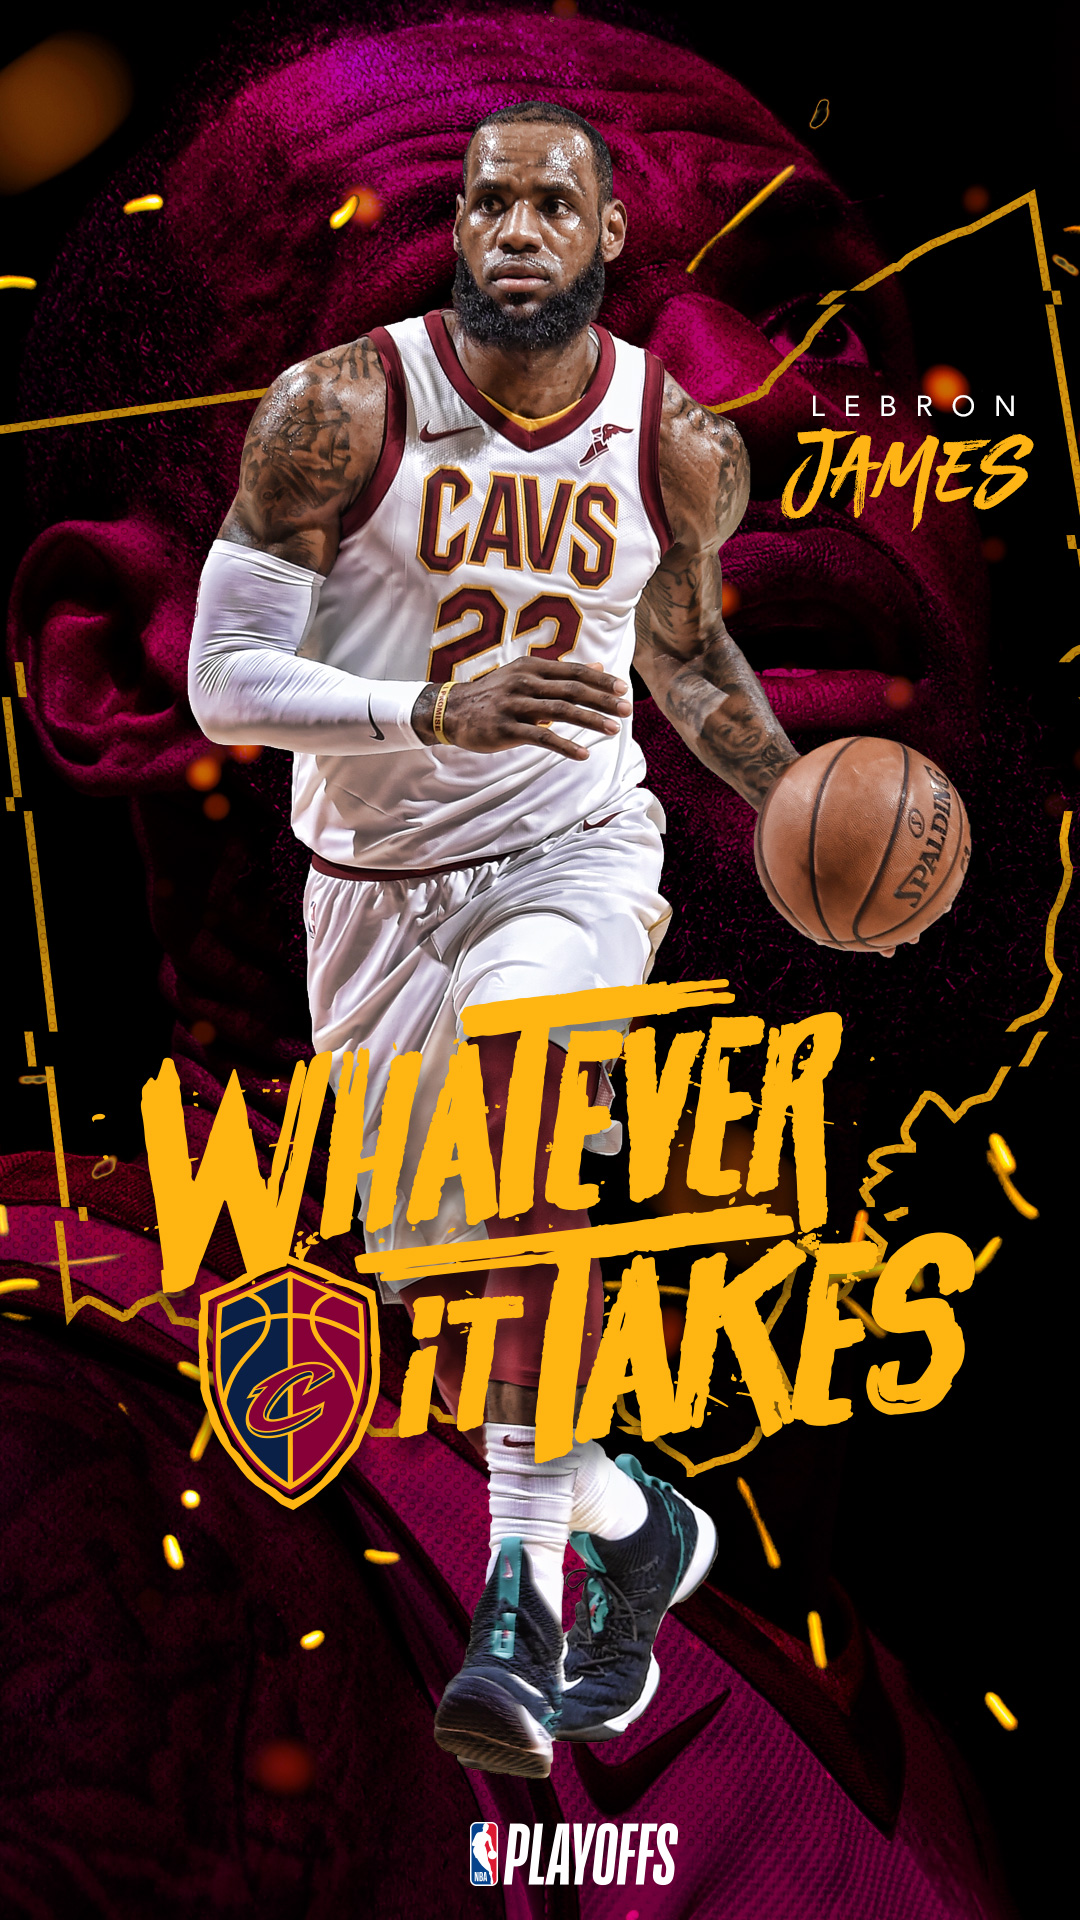 Lebron James Hd Wallpapers, Best Hd Wallpapers, Images - Lebron James  Wallpaper 2018 - 1080x1920 Wallpaper 